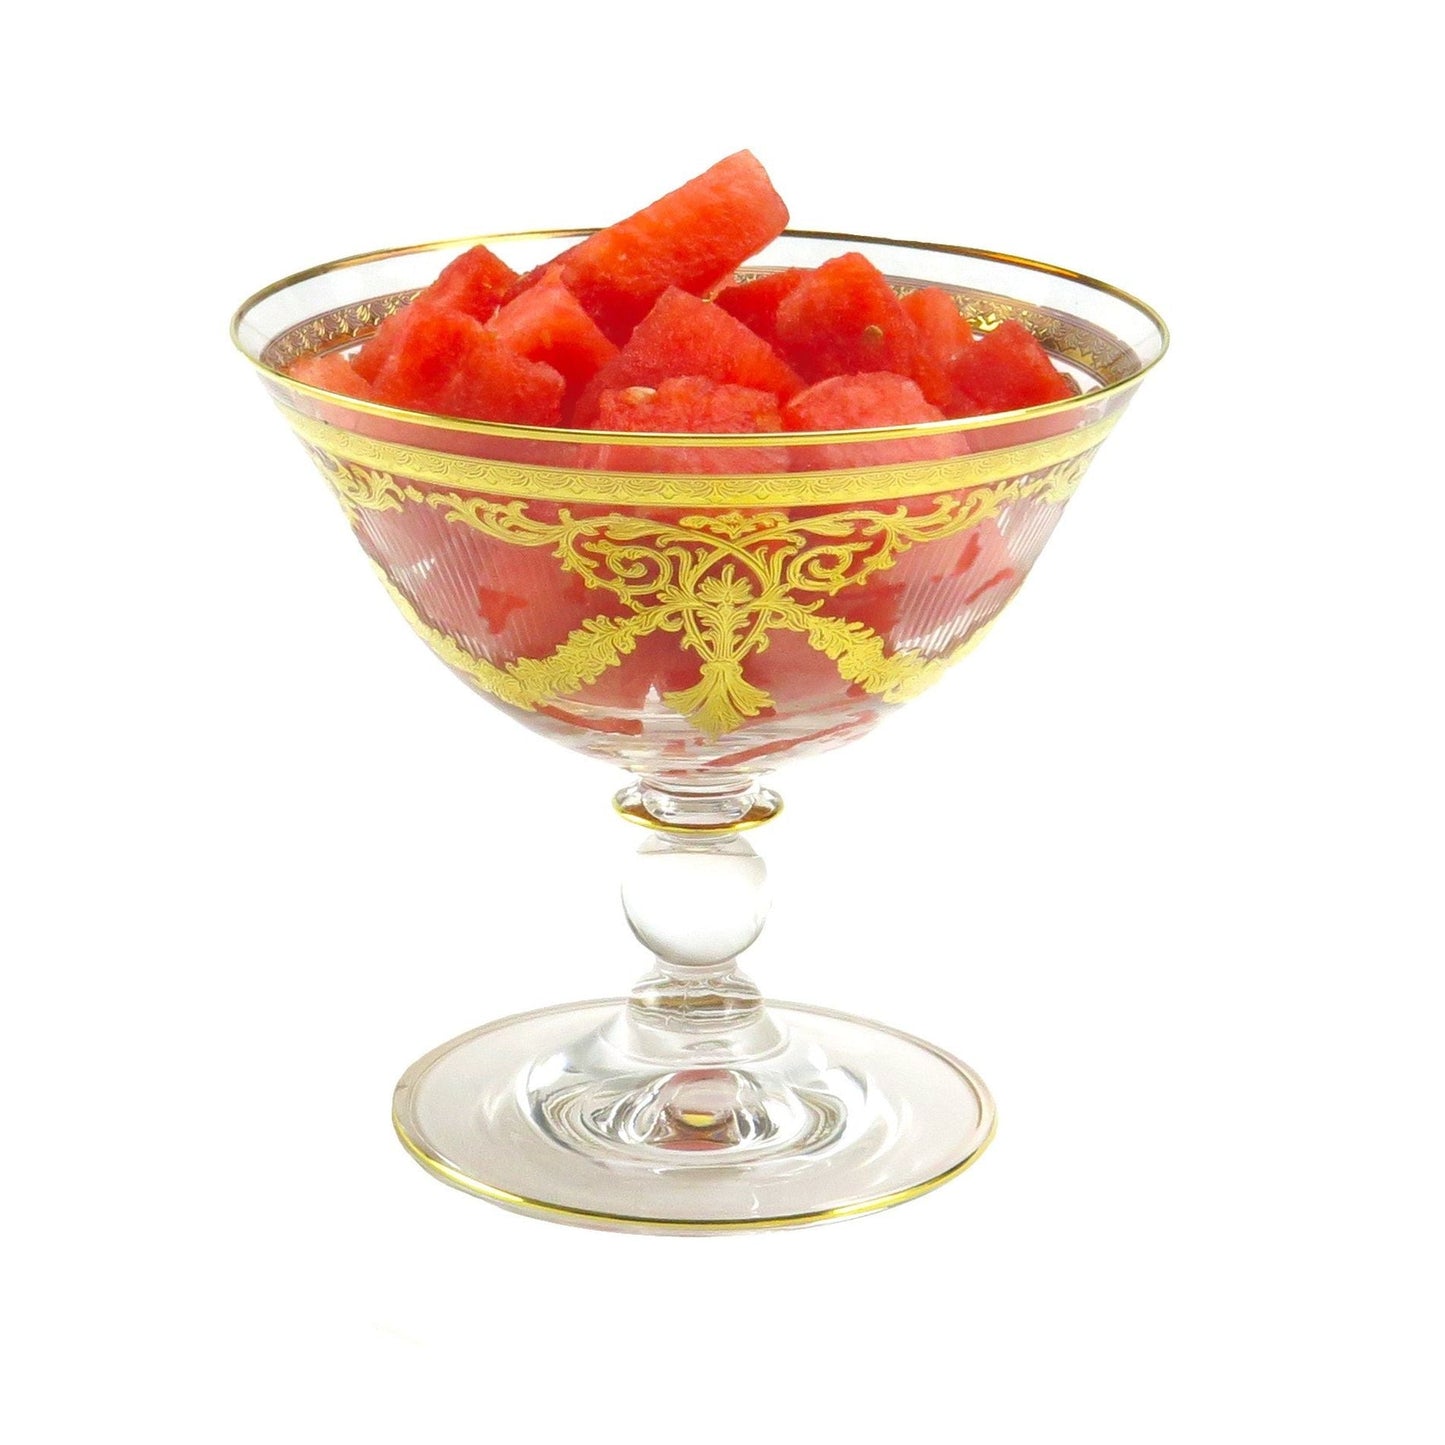 Classic Touch Decor Dessert Cups With 24K Gold Artwork, 4.5"